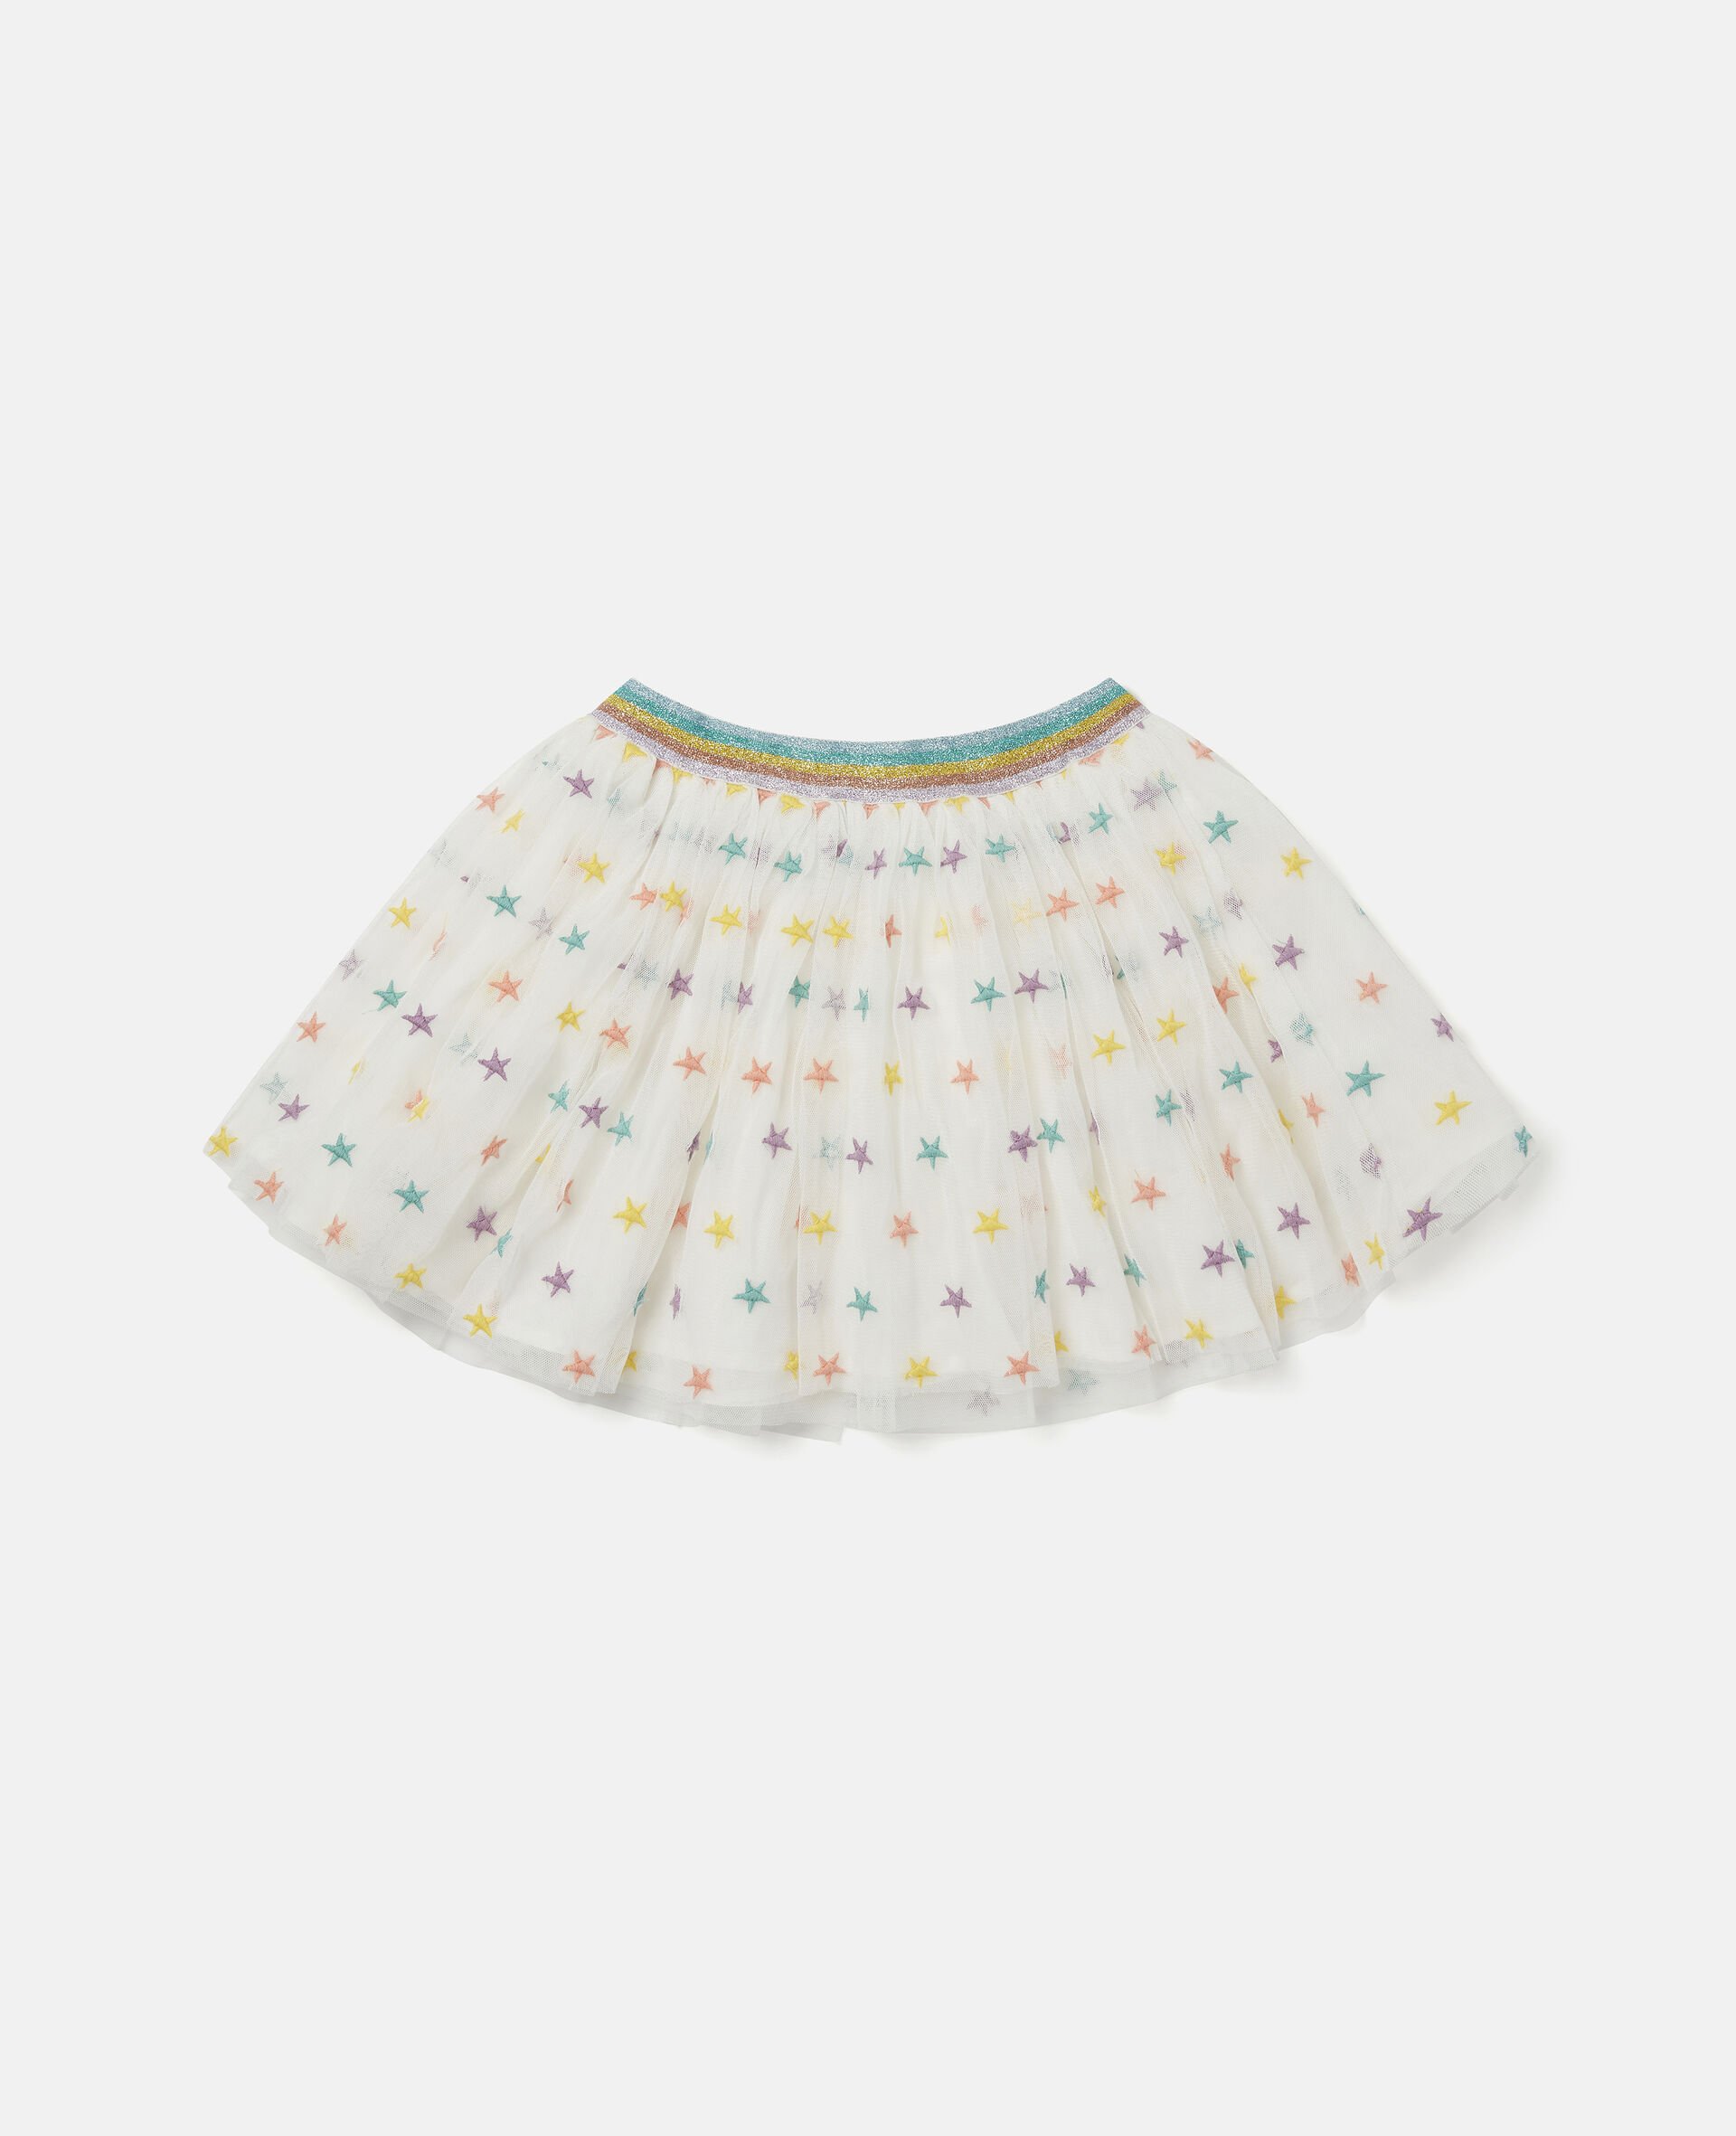 Star Embroidered Tulle Skirt-White-large image number 2